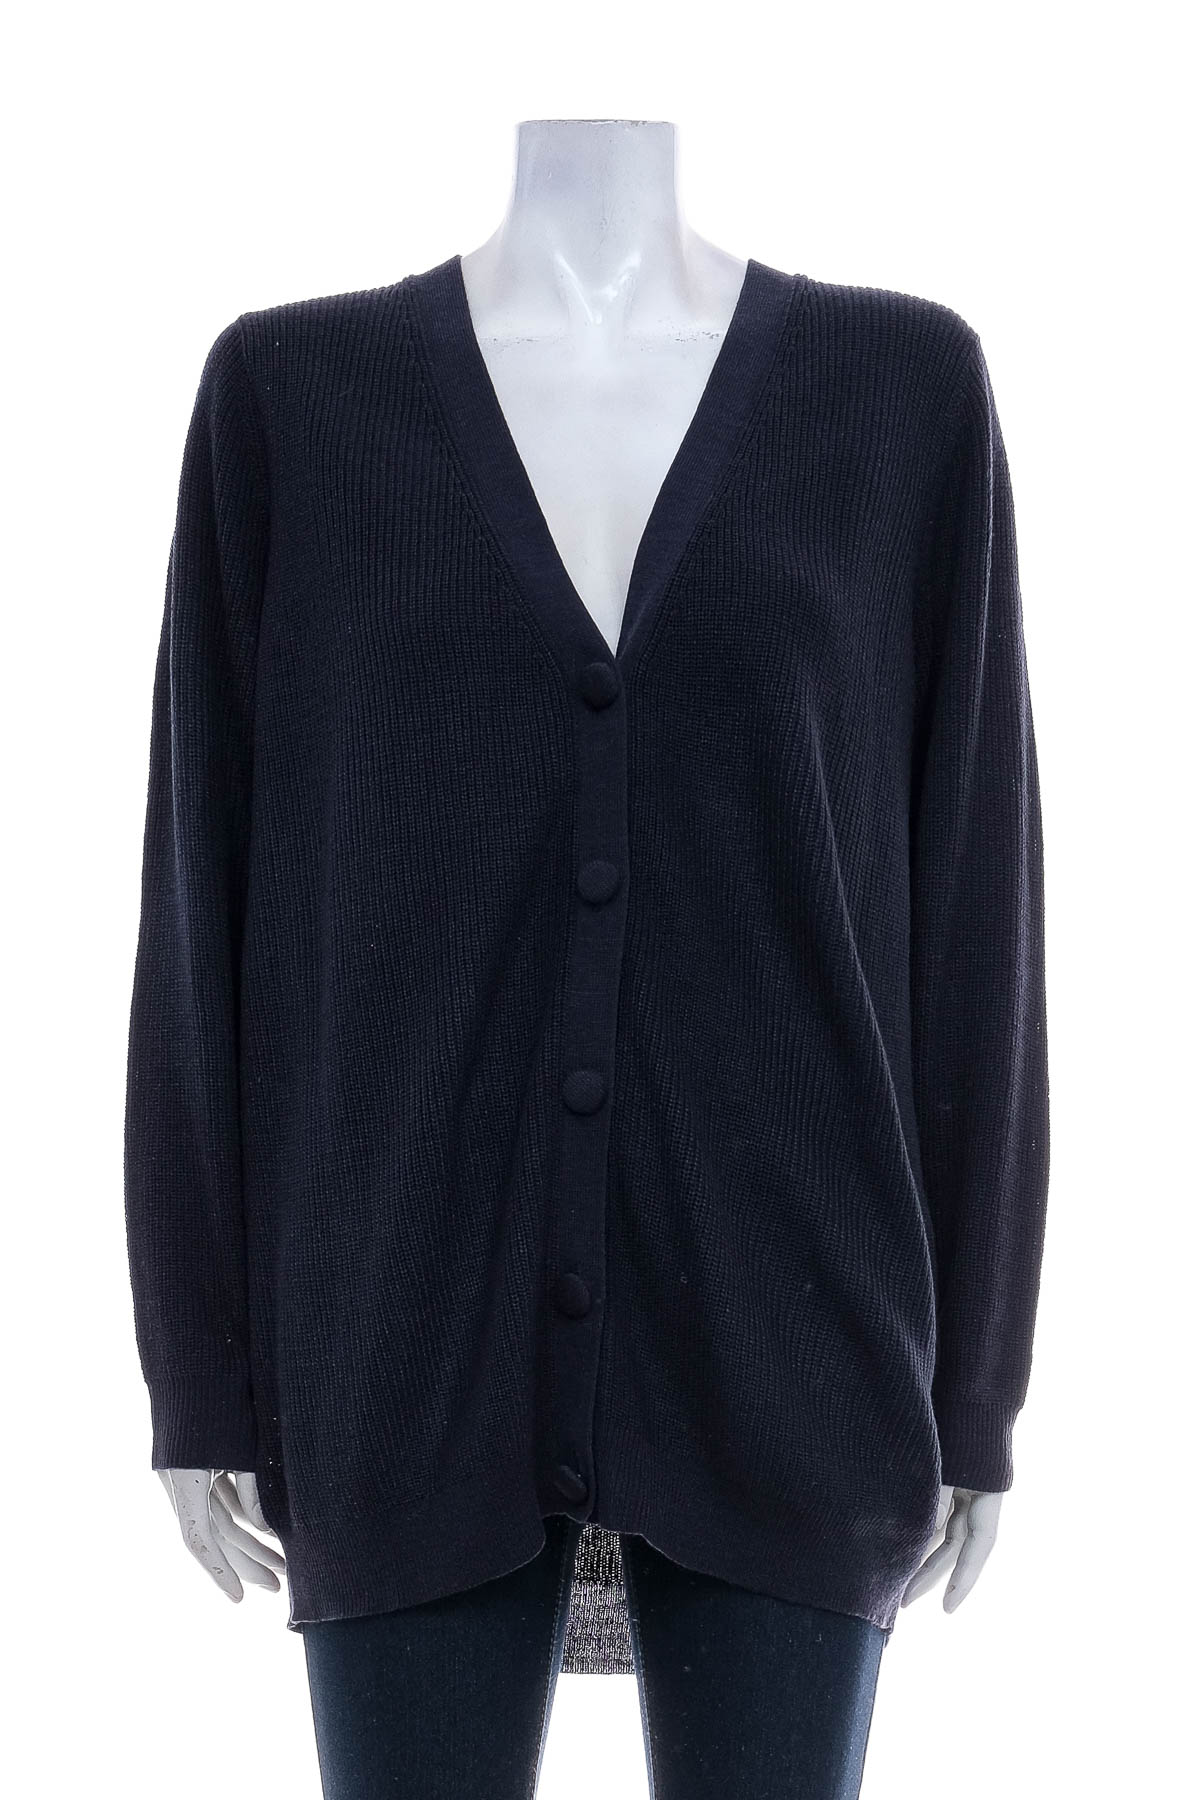 Women's cardigan - By BASICALLY YOU - 0